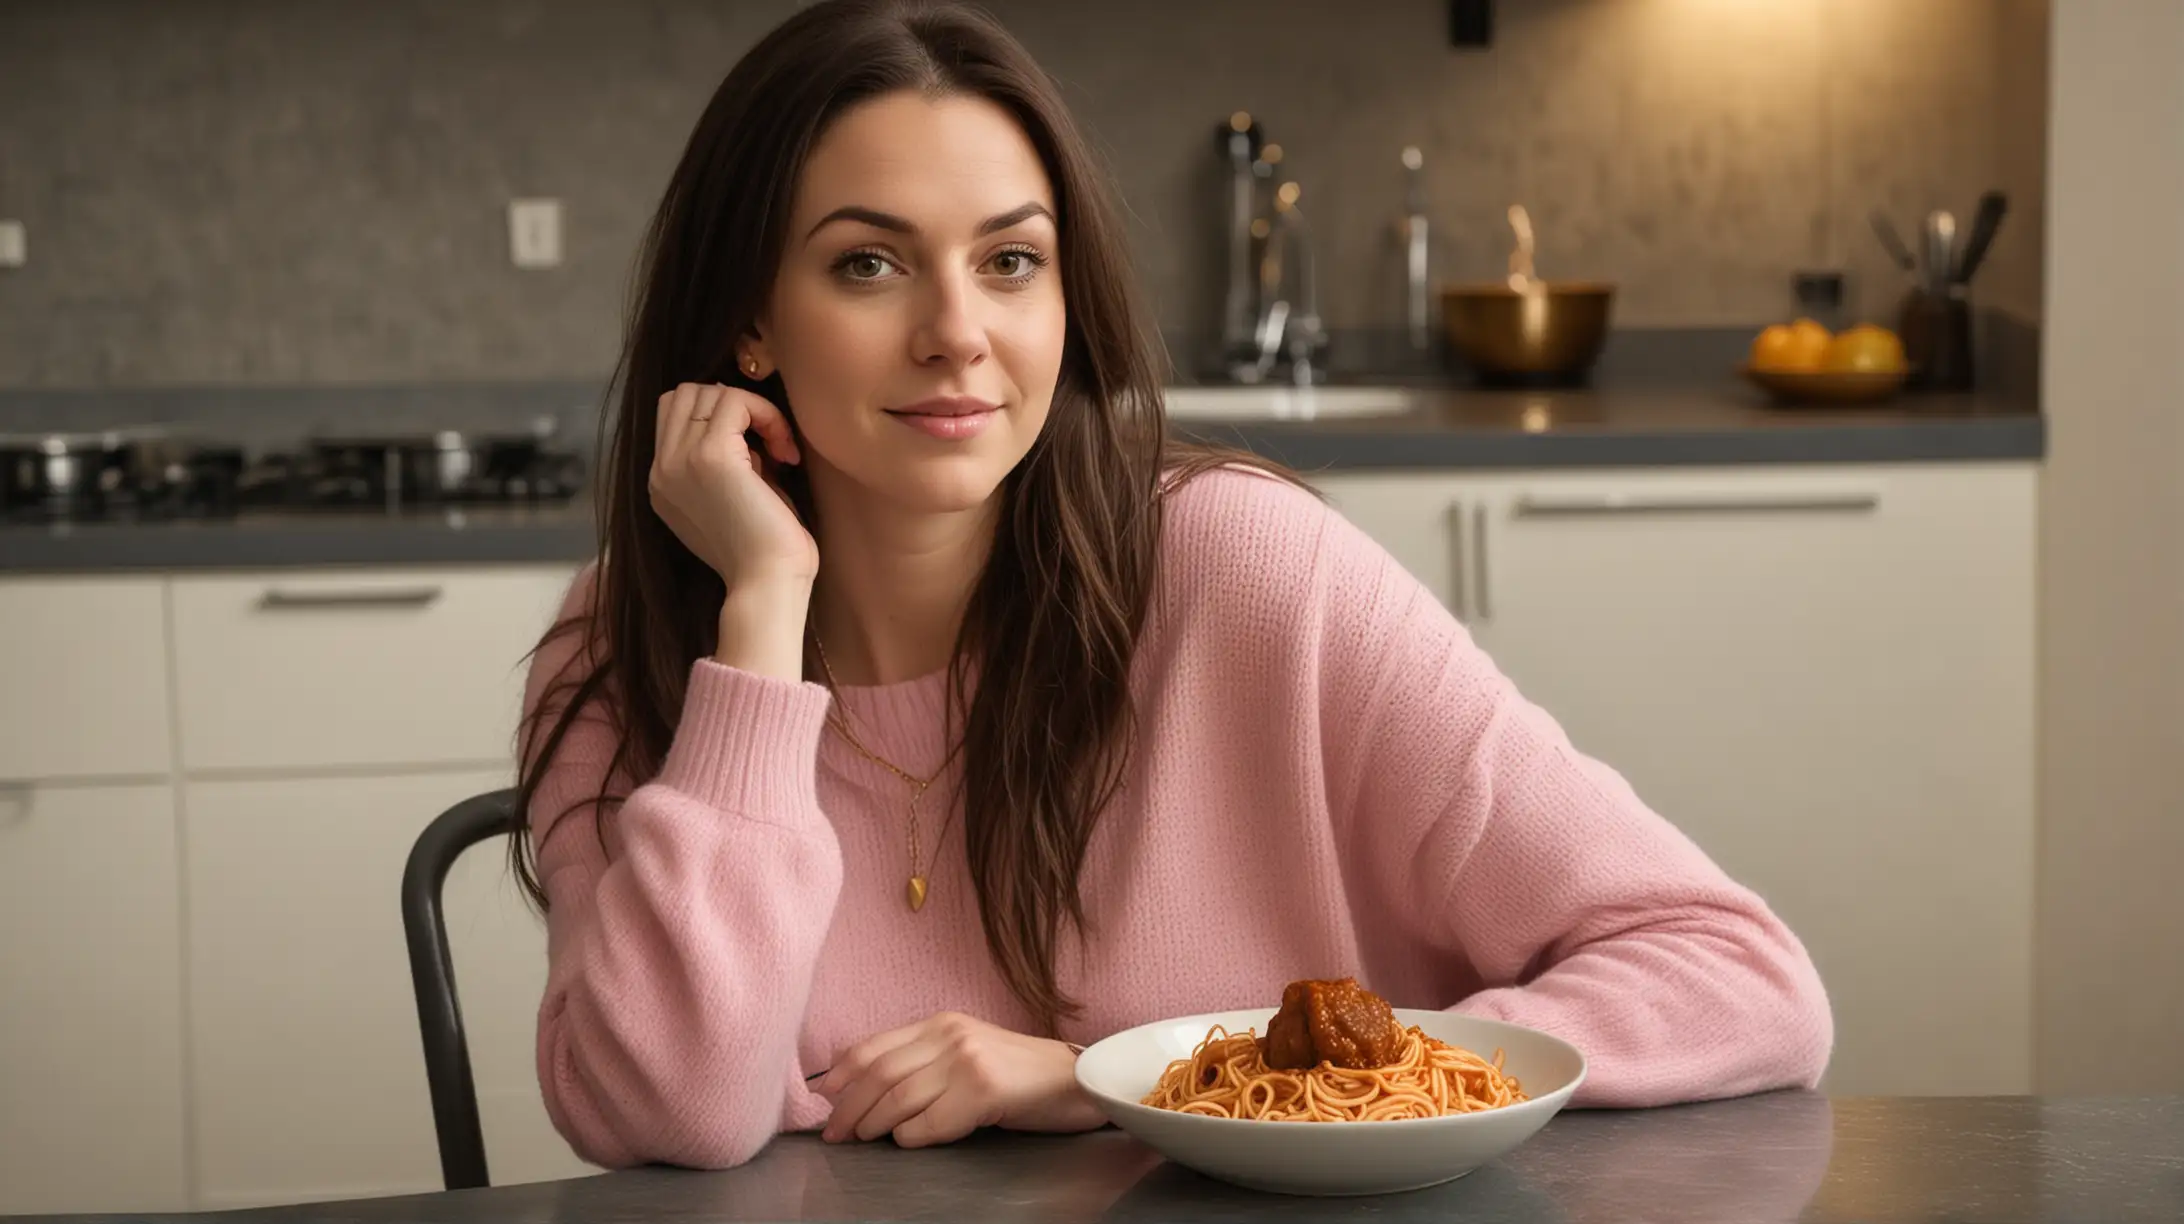 Closeup of 30 year old pale white woman with long dark brown hair, parted to the right, wearing a pink sweater, blue jeans and a gold necklace, sitting down on a kitchen chair in a modern kitchen. There is spaghetti and meatballs in a plate on the table. There is one fork on the table, dim modern high rise urban apartment background at night